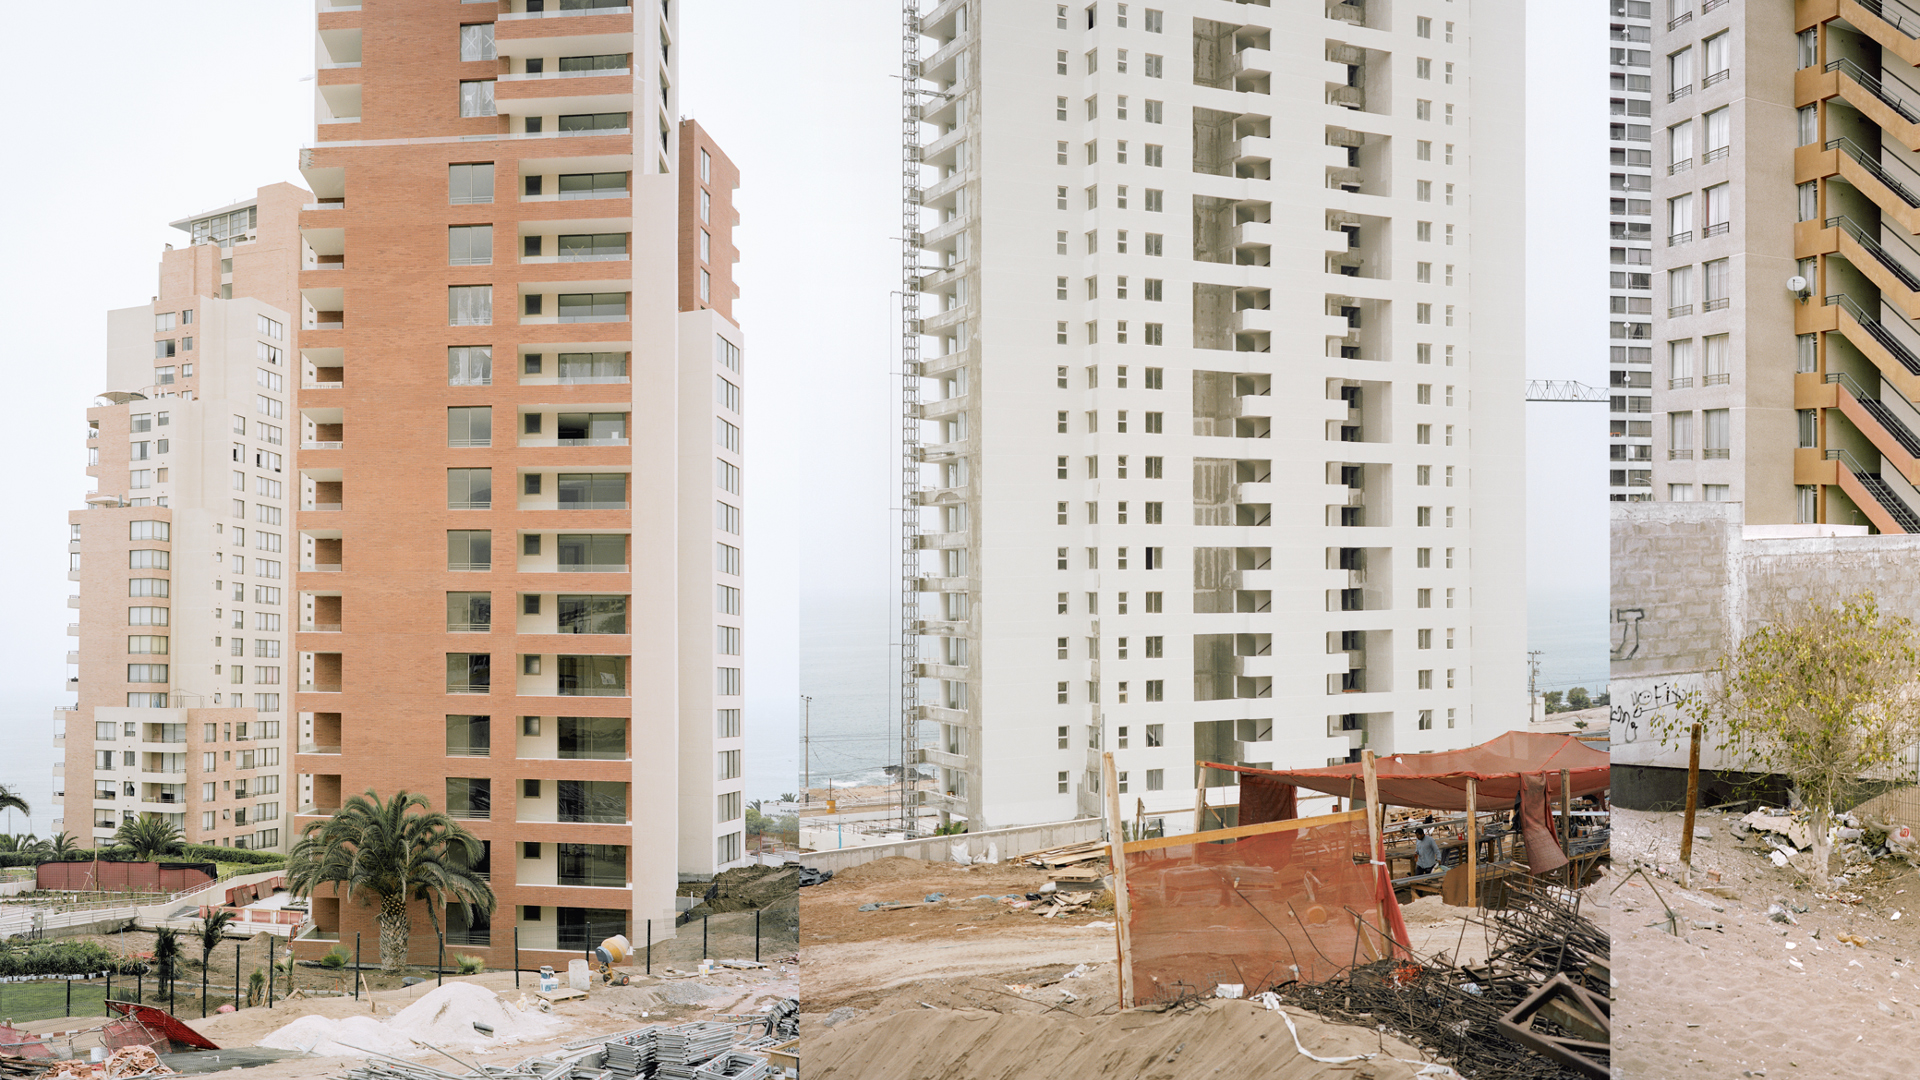 High-rise buildings from copper mining investment boom. Iquique, Chile, 2012